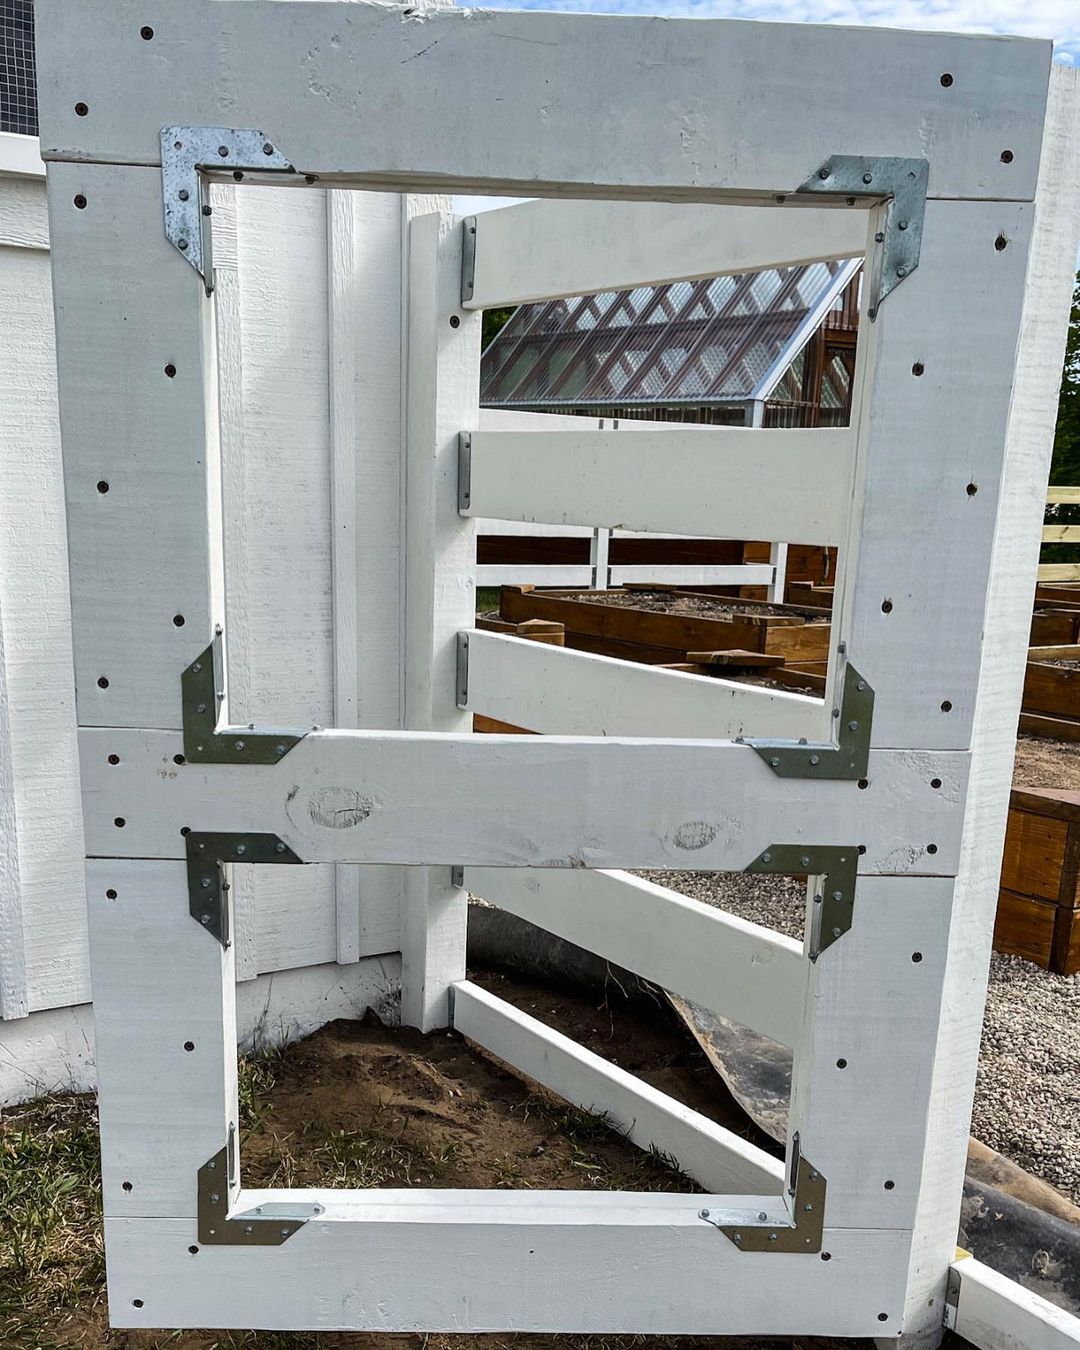 Simpson Strong-Tie Rigid Tie® angles on the inside corners of the gates